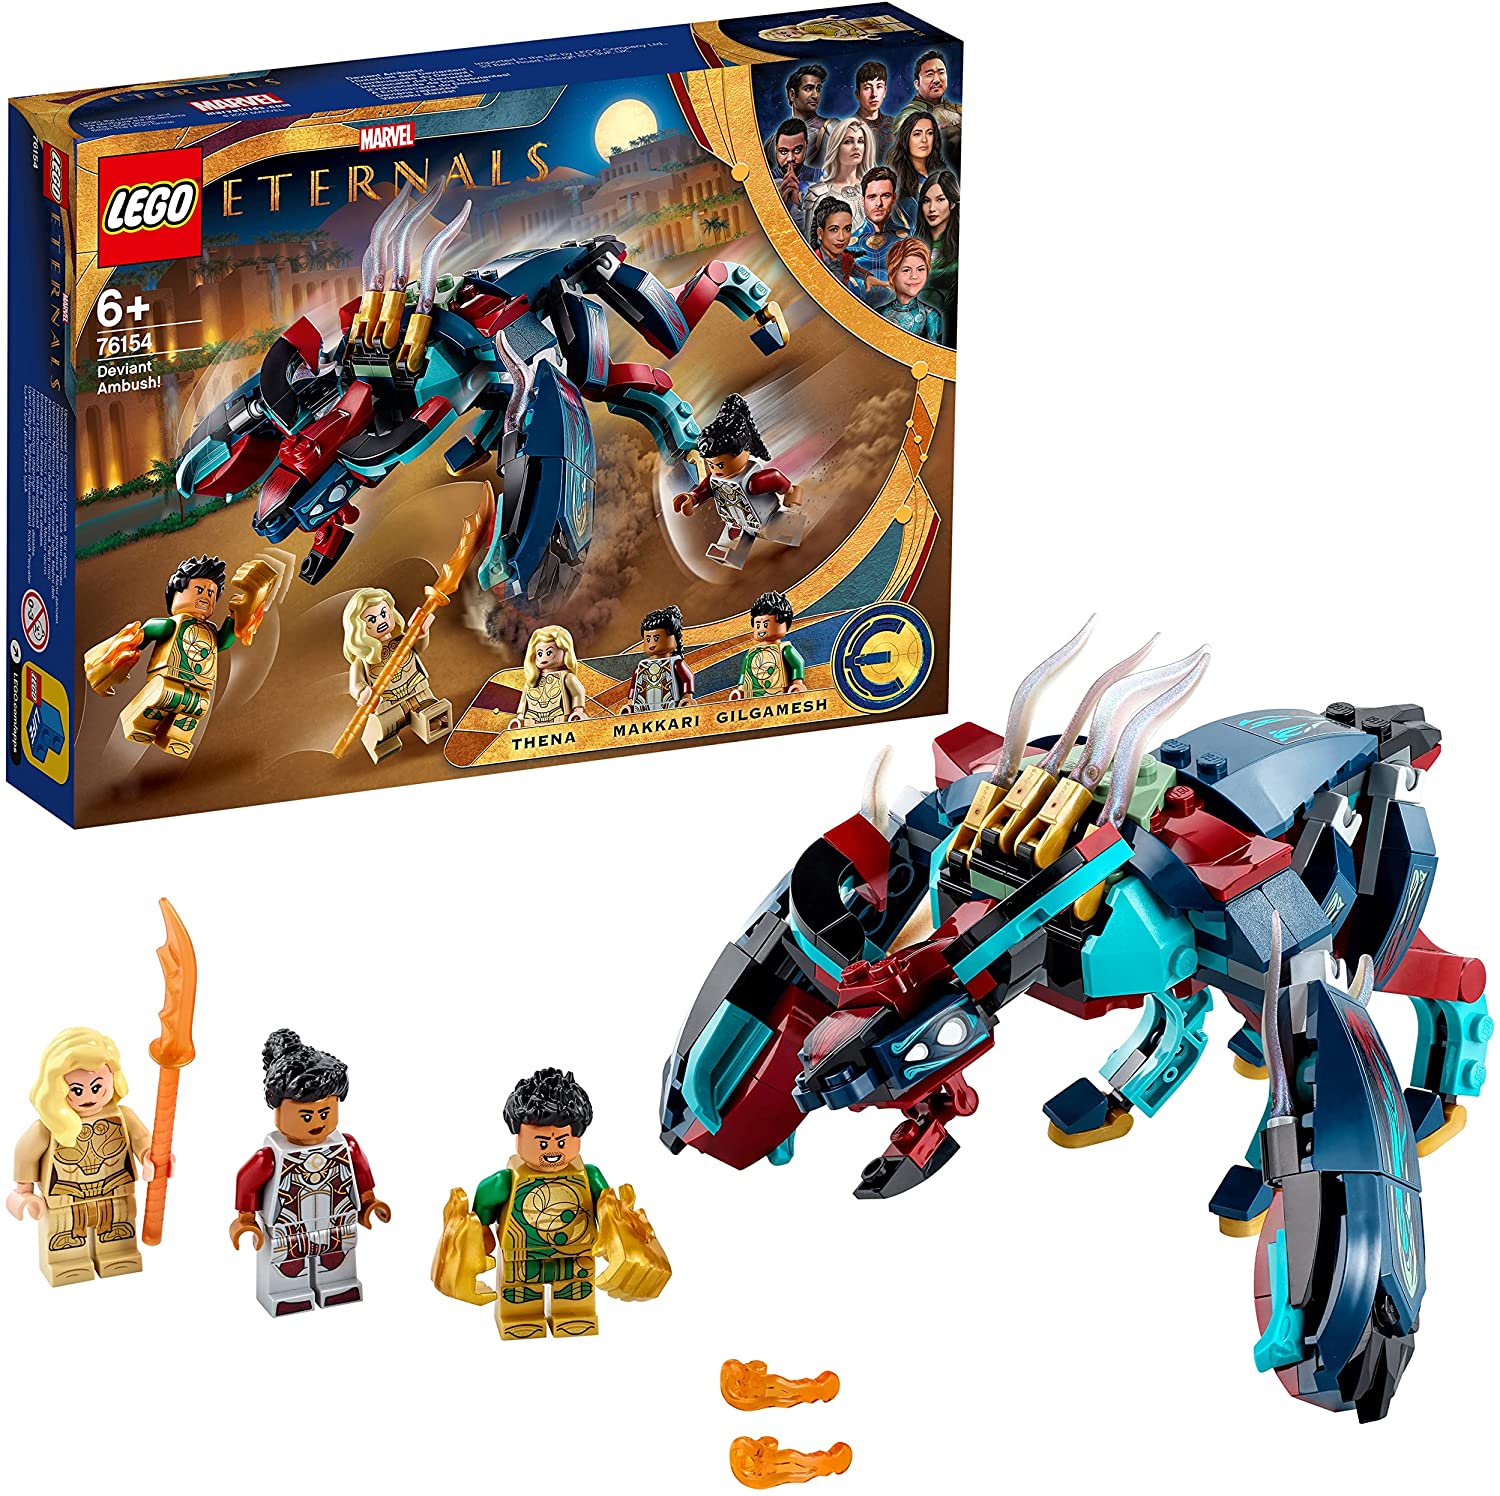 LEGO 76154 Marvel Absorption of the Deviant! Toy from the Marvel Movie The 